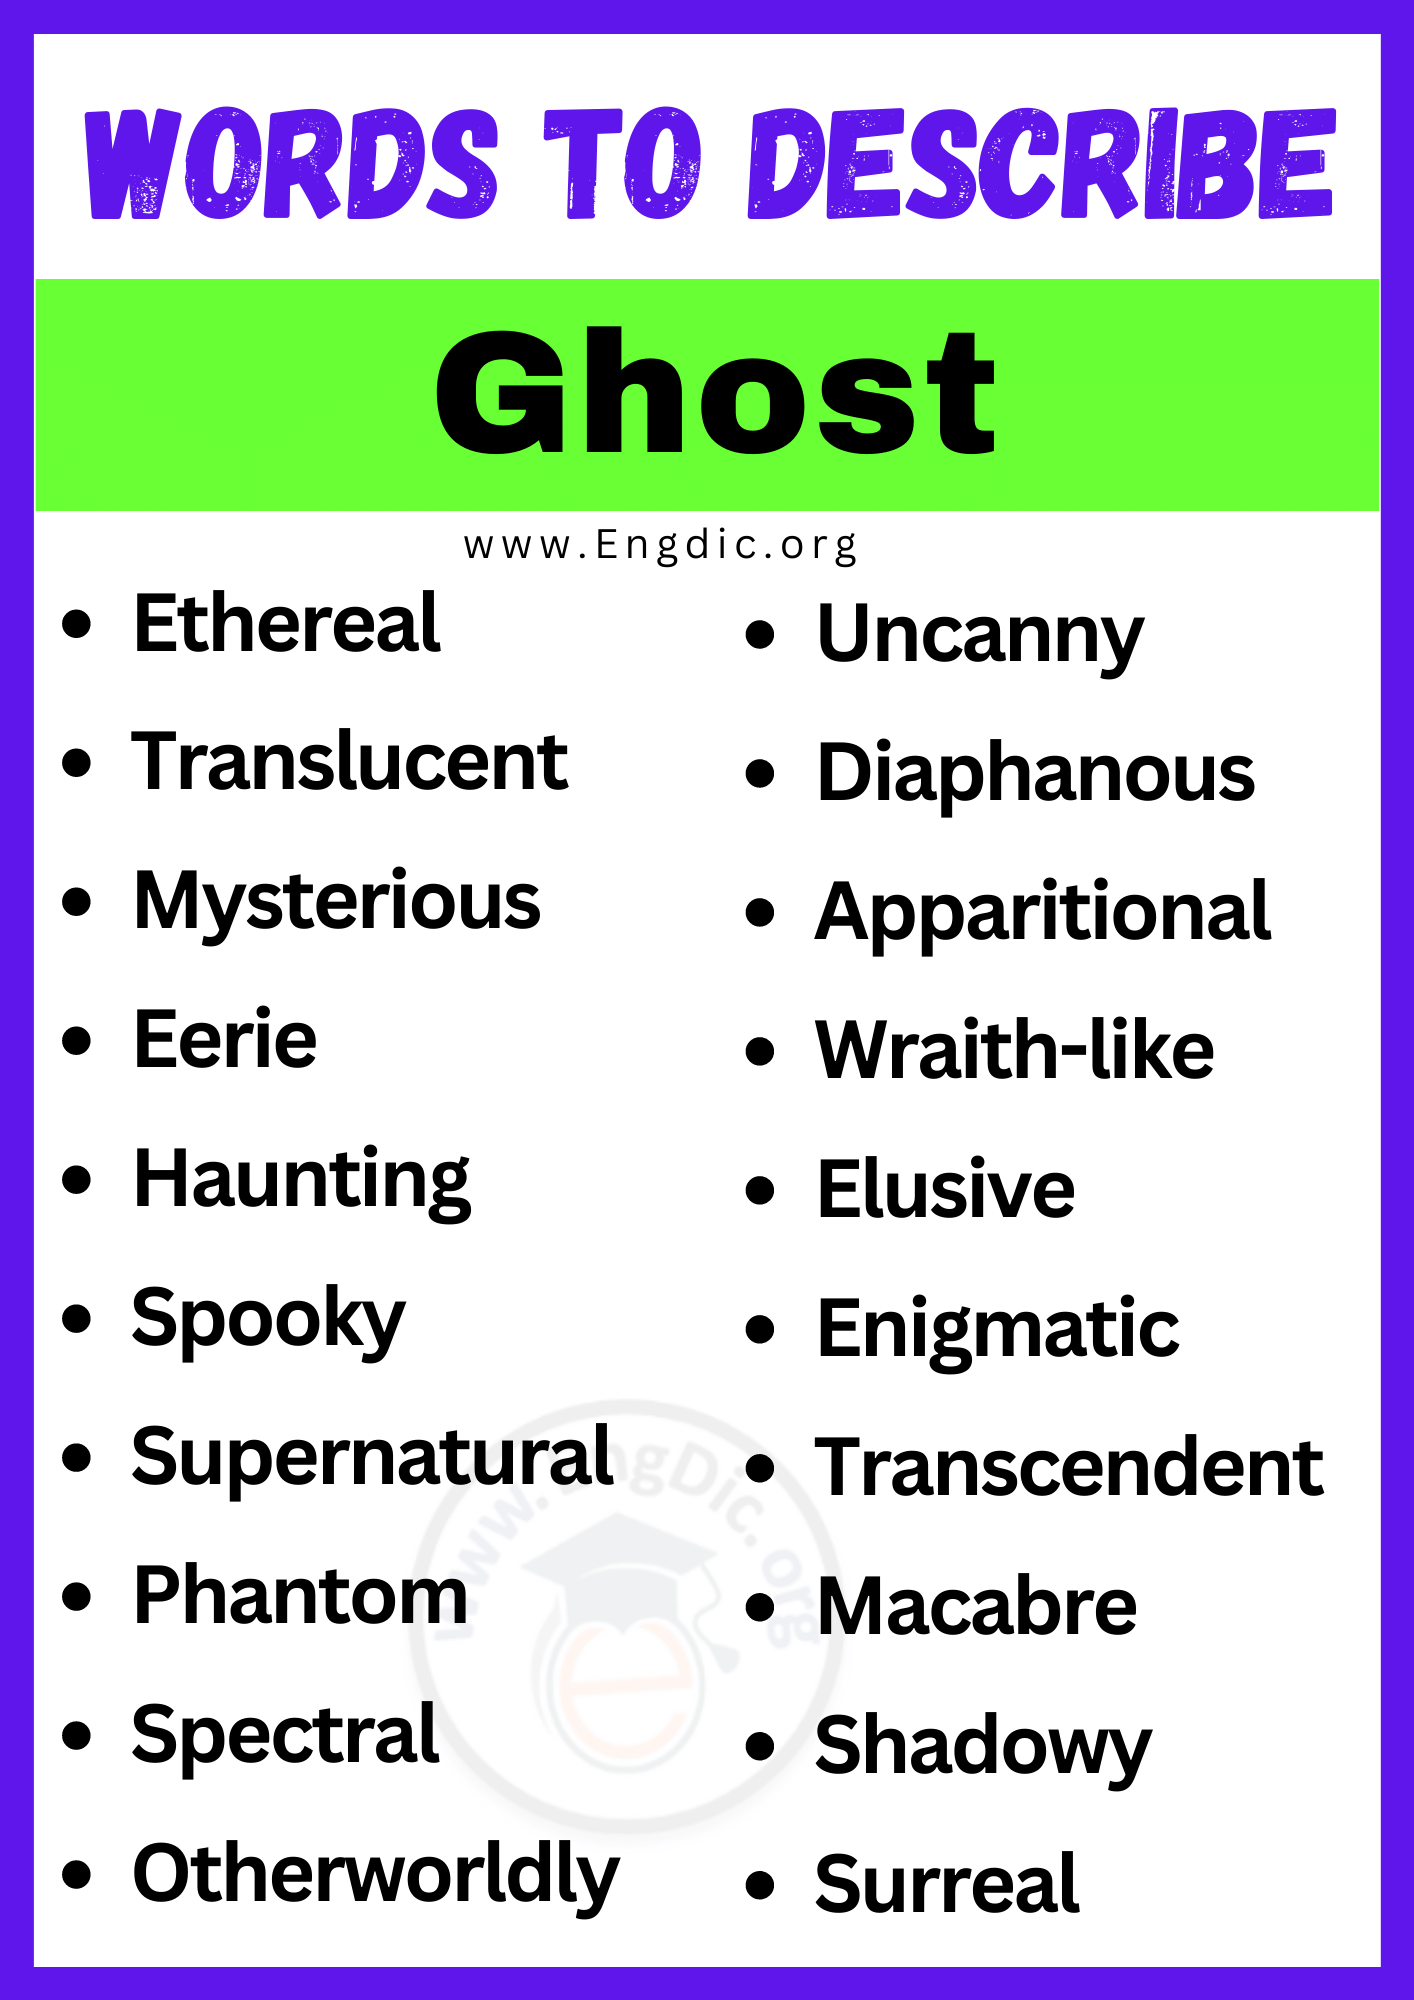 Words to Describe Ghost